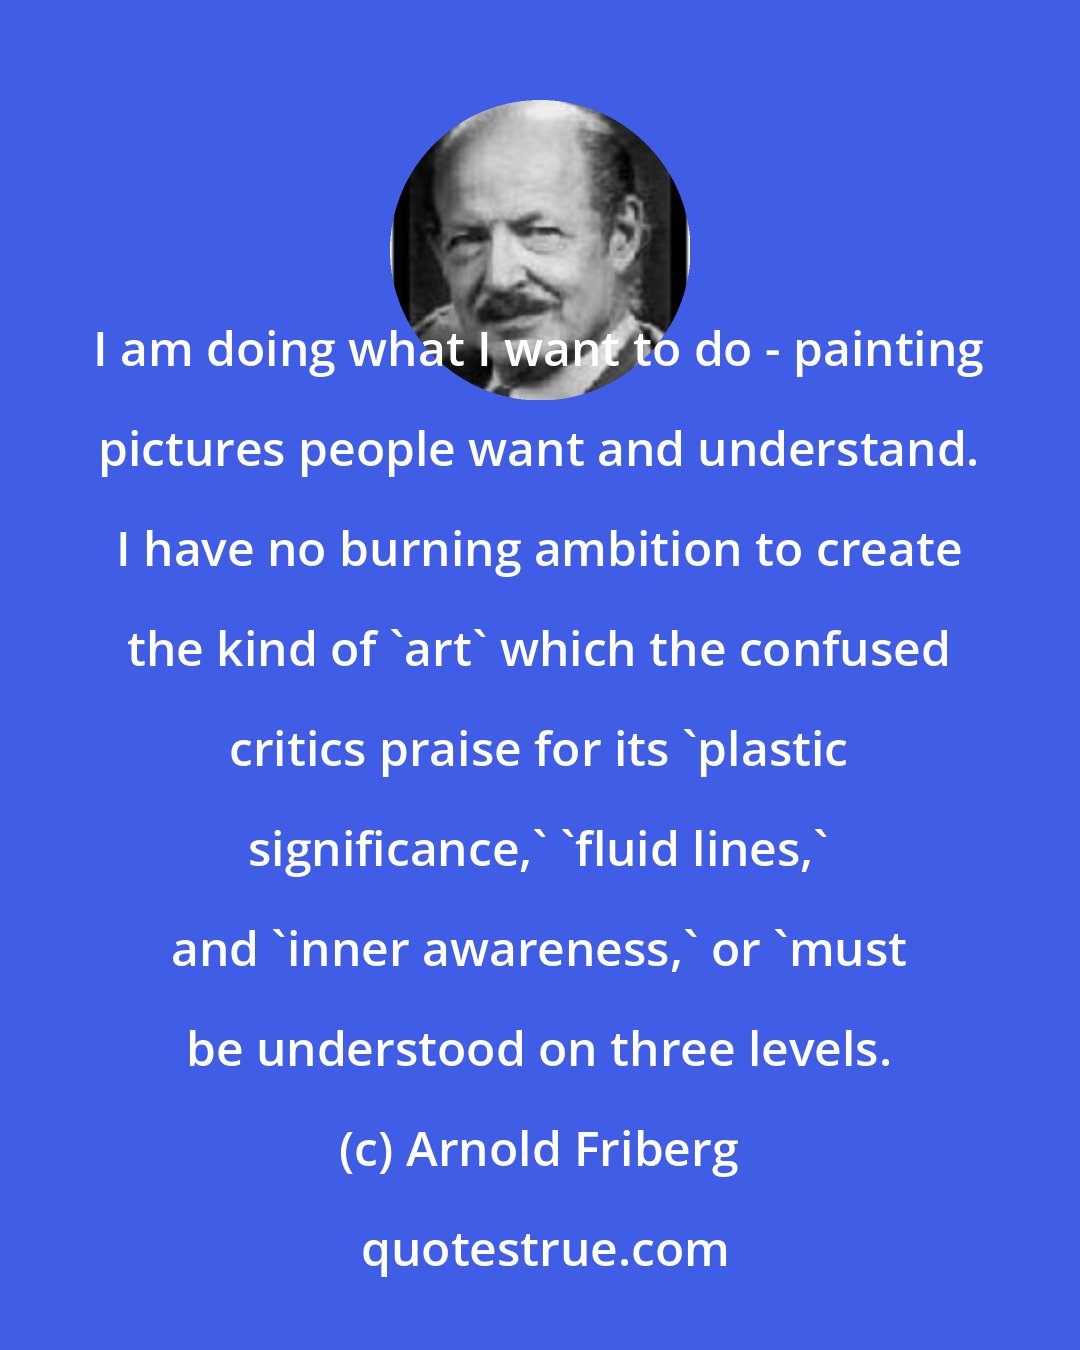 Arnold Friberg: I am doing what I want to do - painting pictures people want and understand. I have no burning ambition to create the kind of 'art' which the confused critics praise for its 'plastic significance,' 'fluid lines,' and 'inner awareness,' or 'must be understood on three levels.